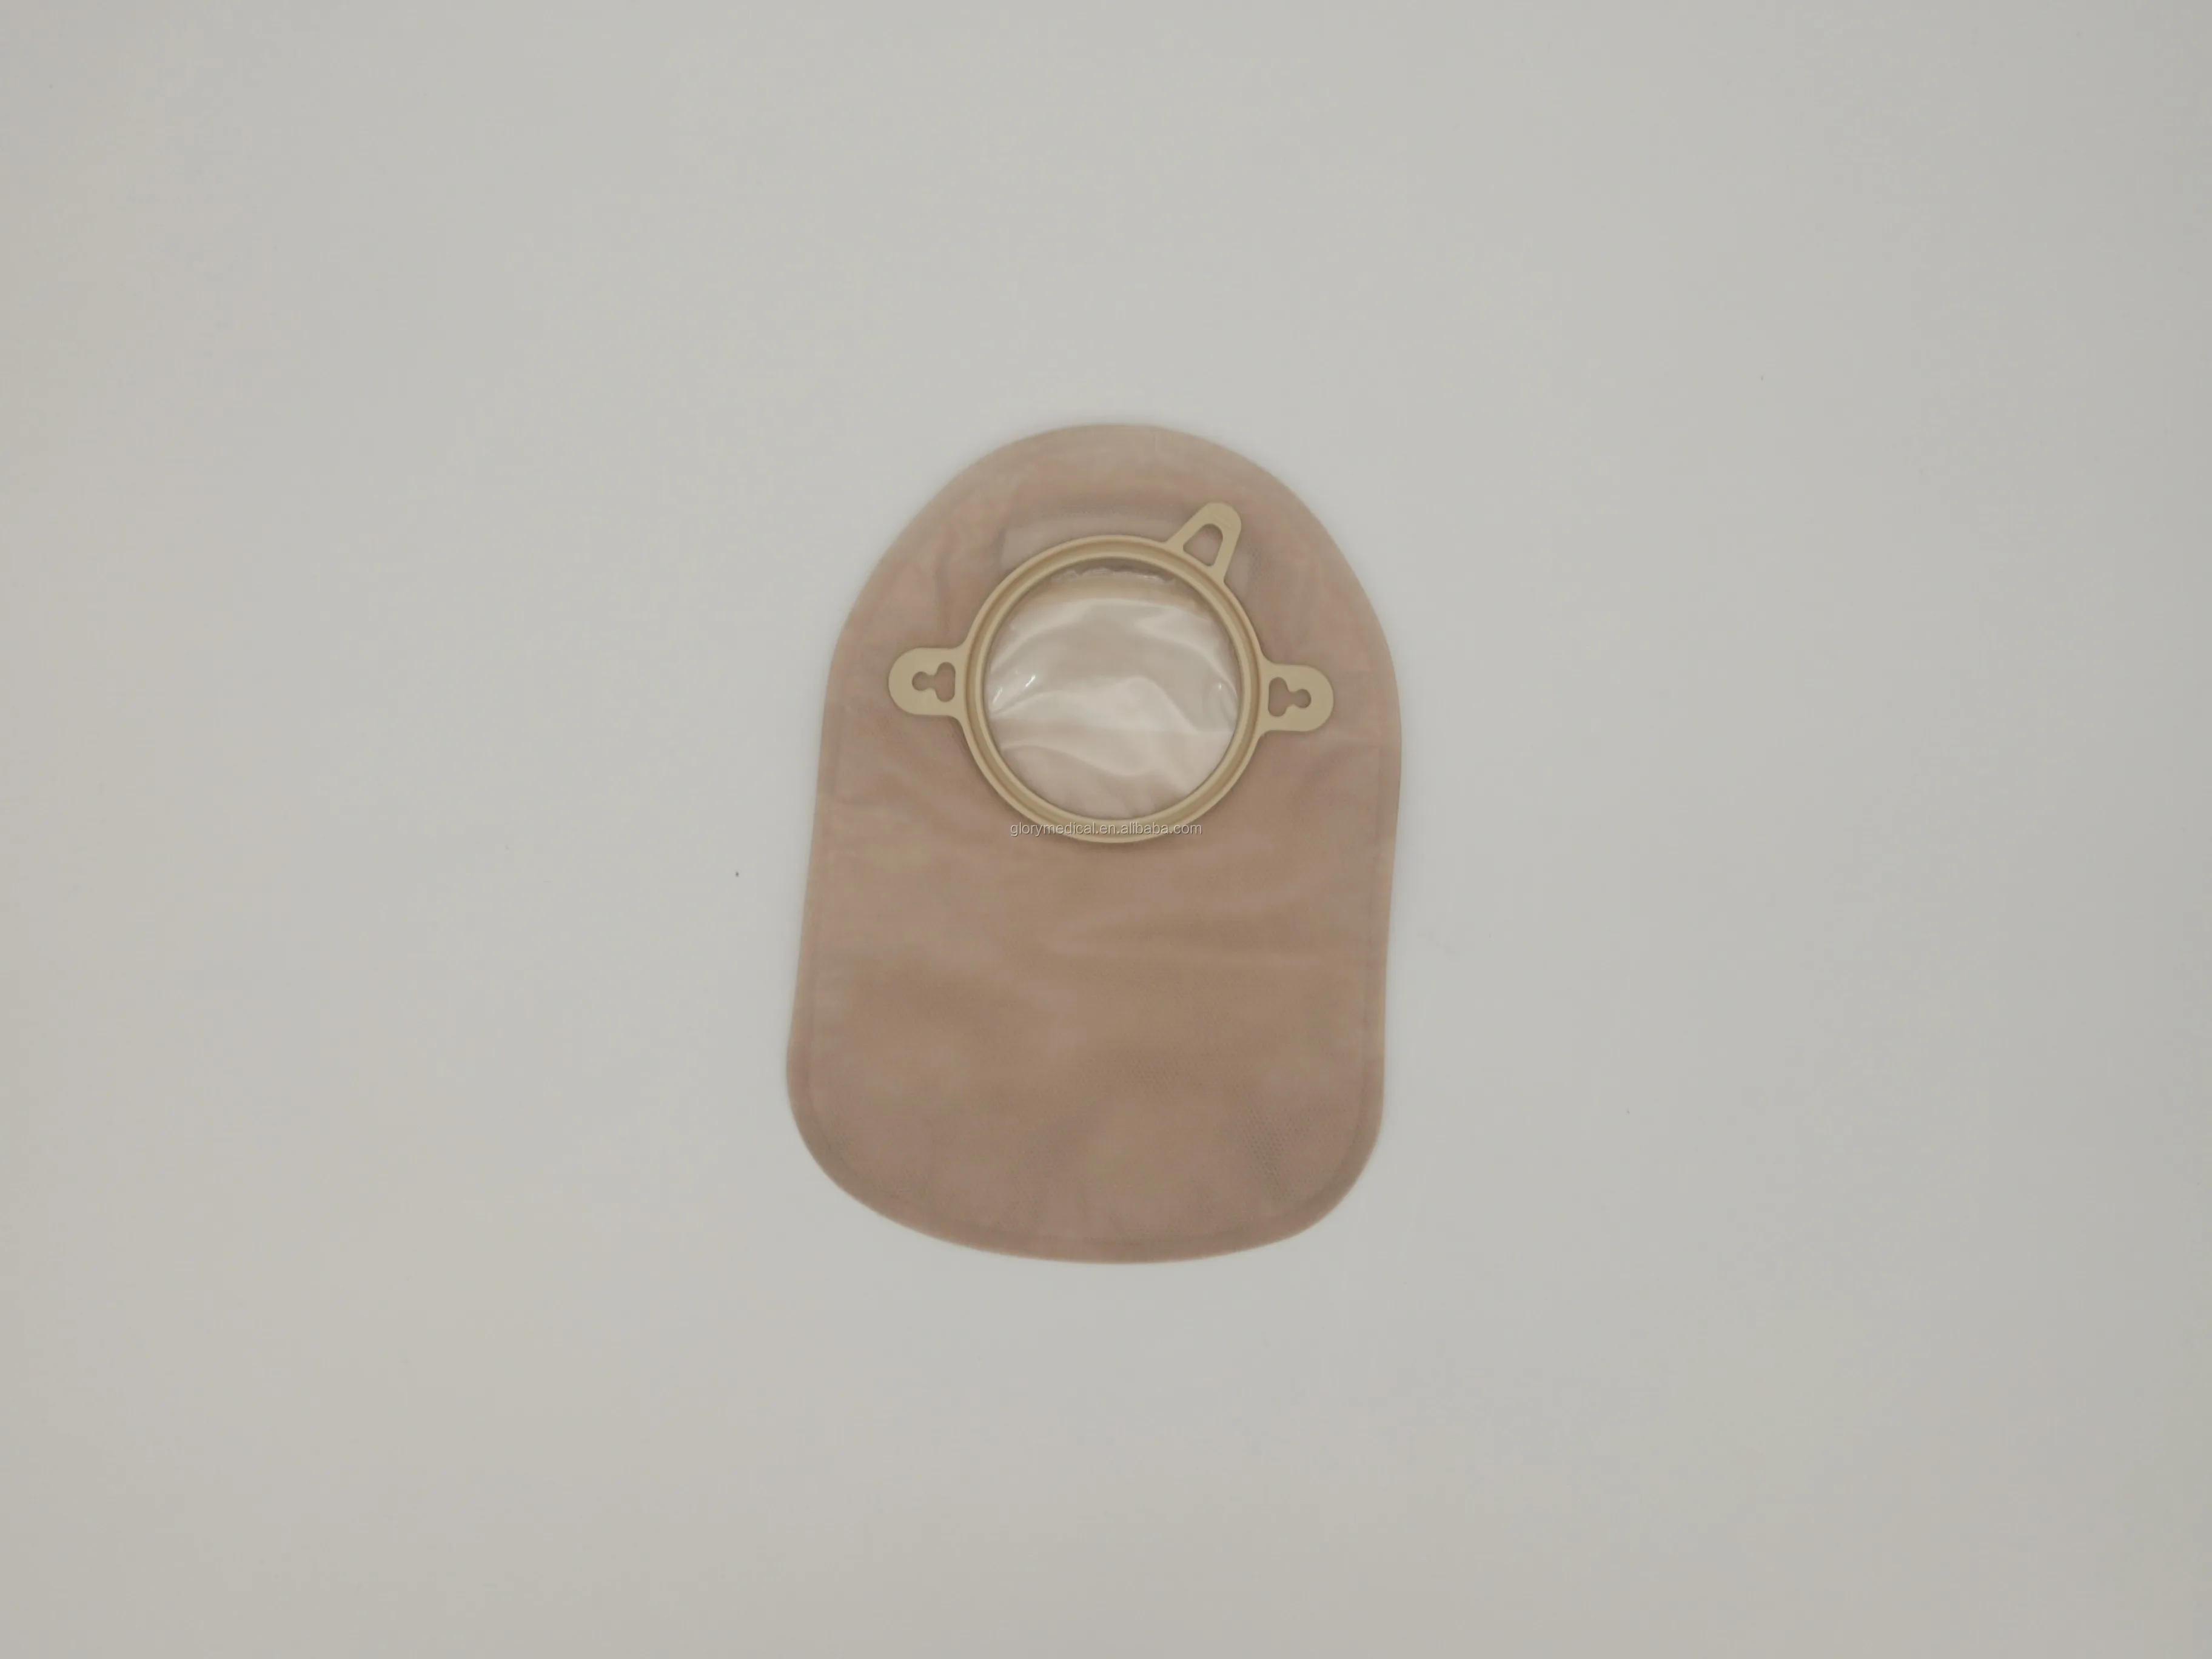 disposable ostomy bags